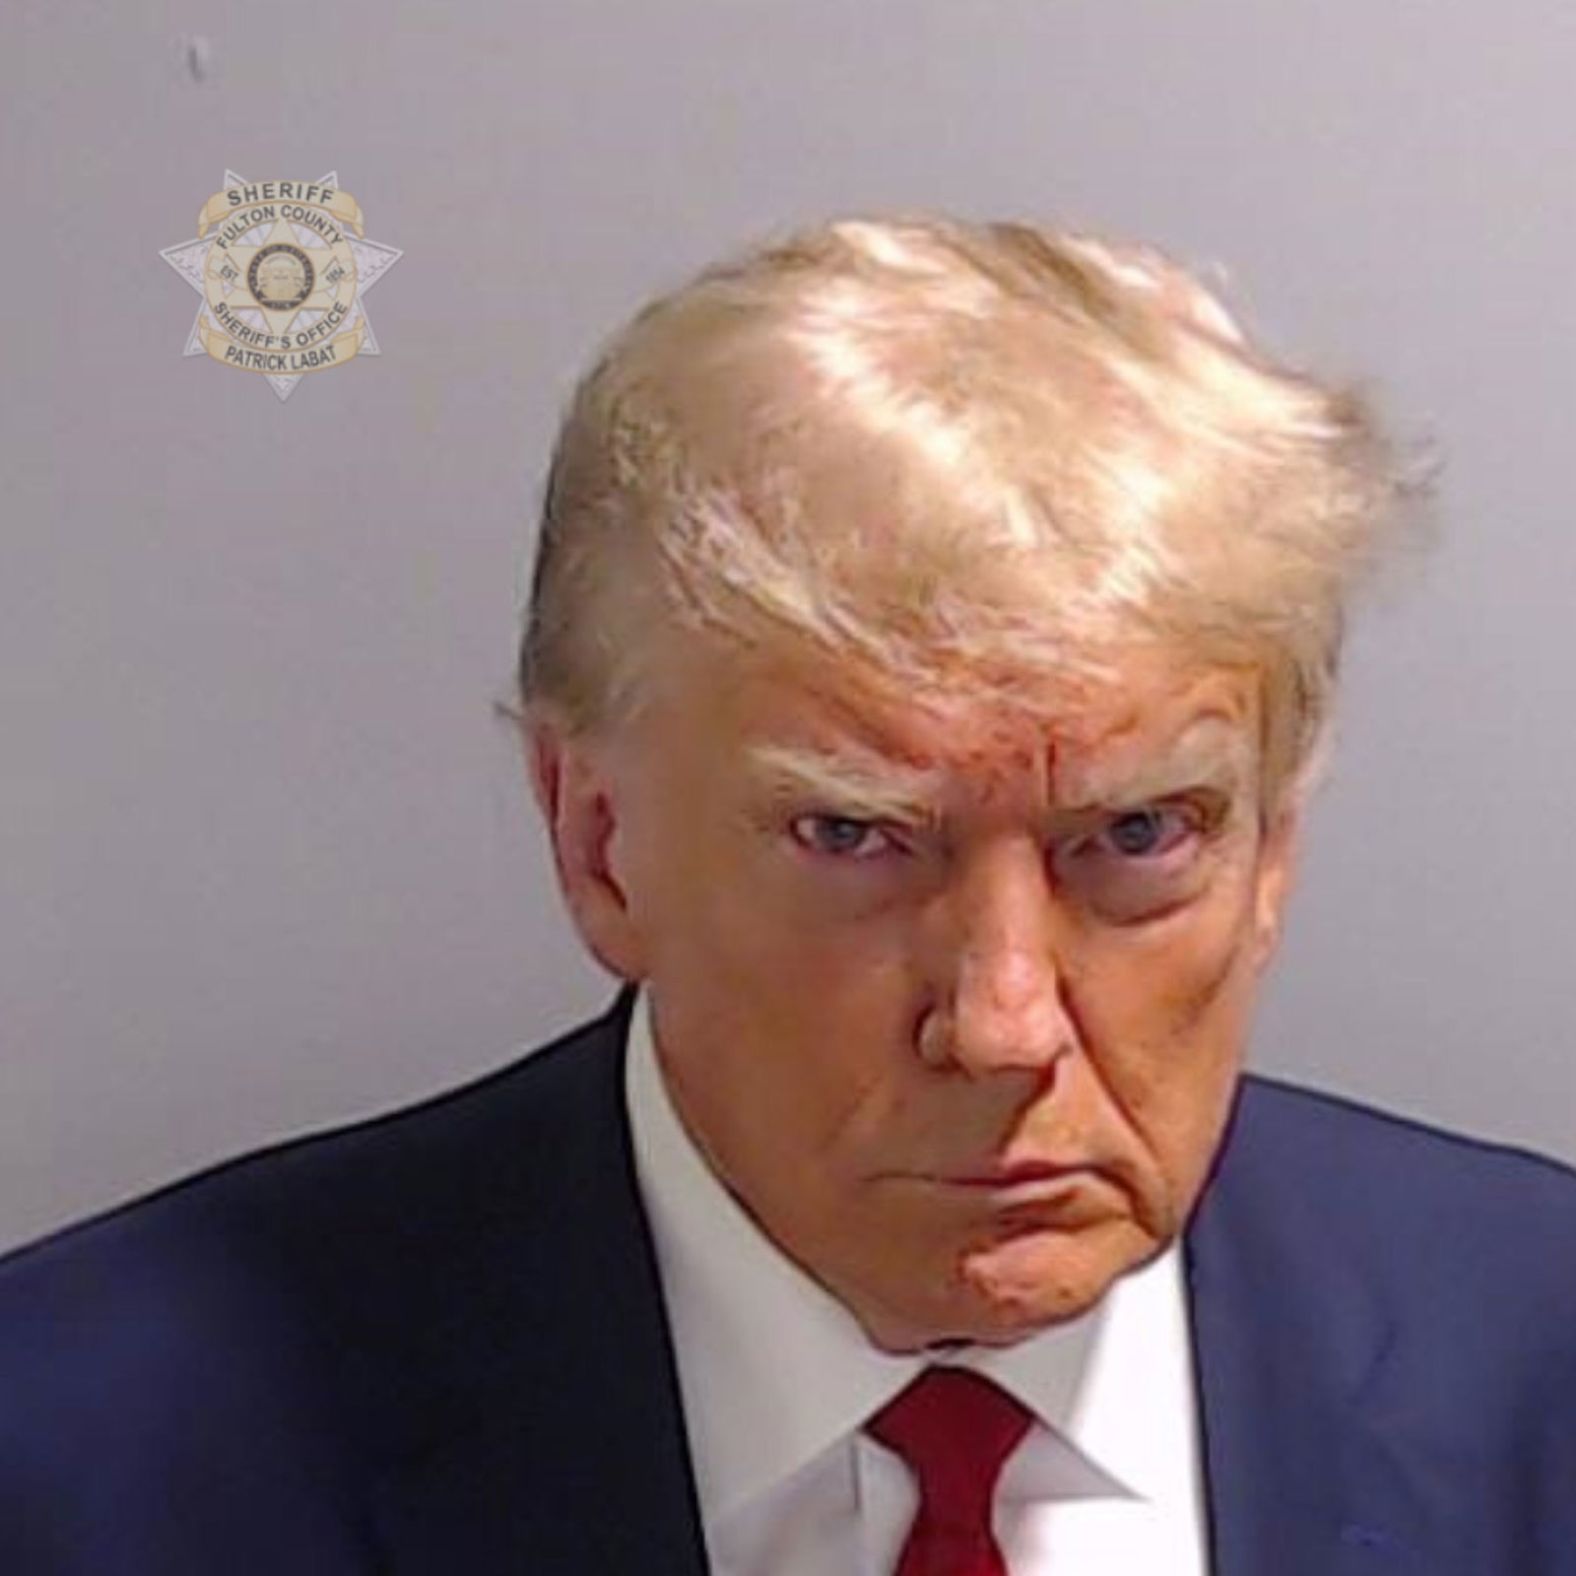 This <a href="index.php?page=&url=https%3A%2F%2Fwww.cnn.com%2F2023%2F08%2F24%2Fpolitics%2Ftrump-mug-shot-analysis%2Findex.html" target="_blank">booking photo</a> of Trump was taken in Atlanta in August 2023. Trump was booked on more than a dozen charges stemming from his efforts to reverse Georgia's 2020 election results. His booking number was P01135809. He is the first former US president with a mug shot.